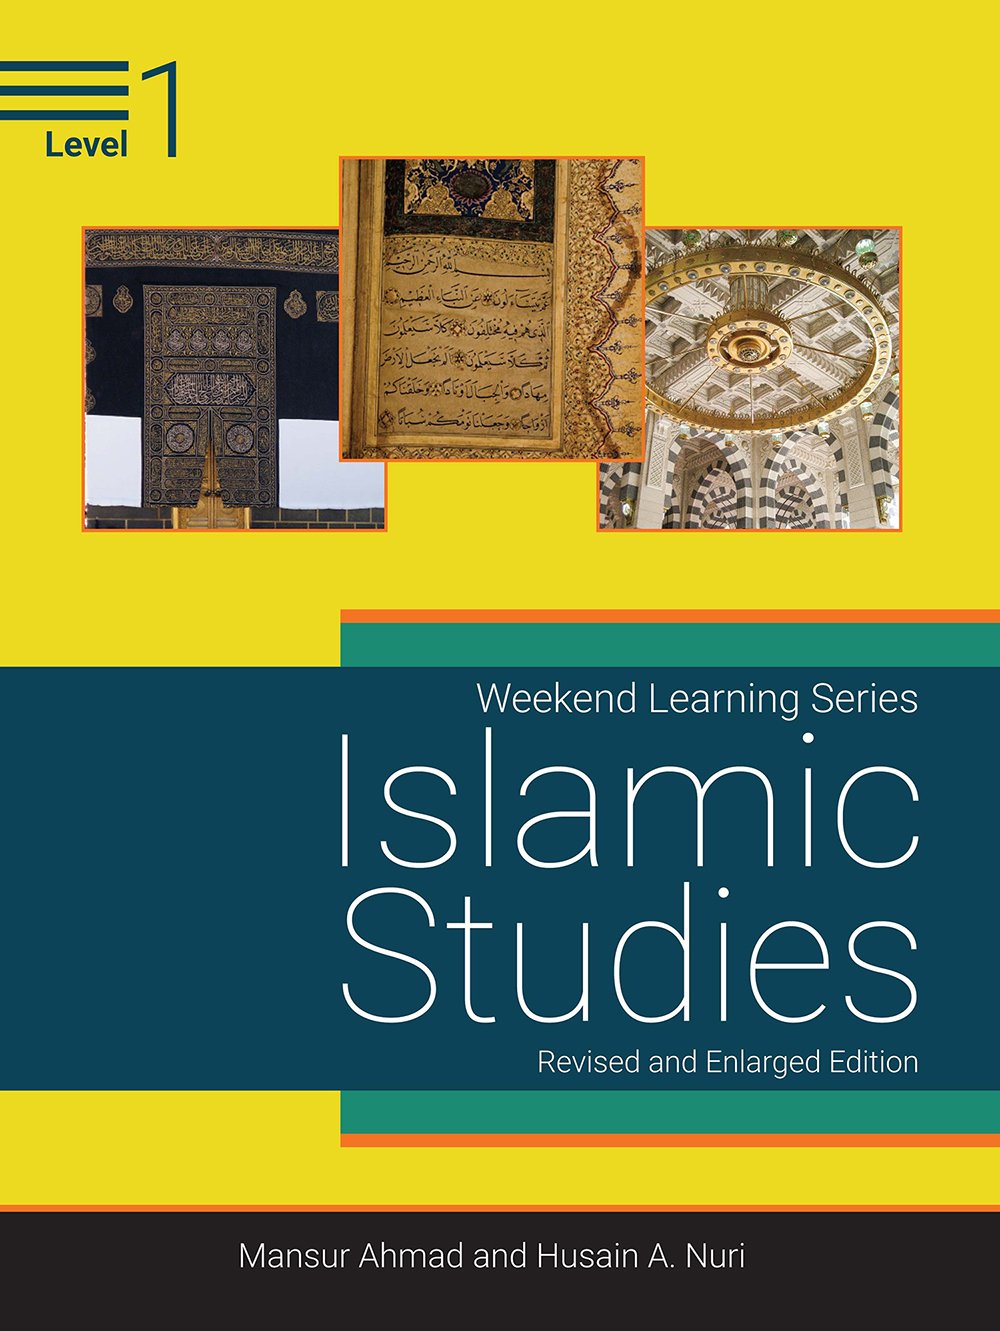 Weekend Learning Series - Islamic Studies - Level 1 Textbook - Front Cover